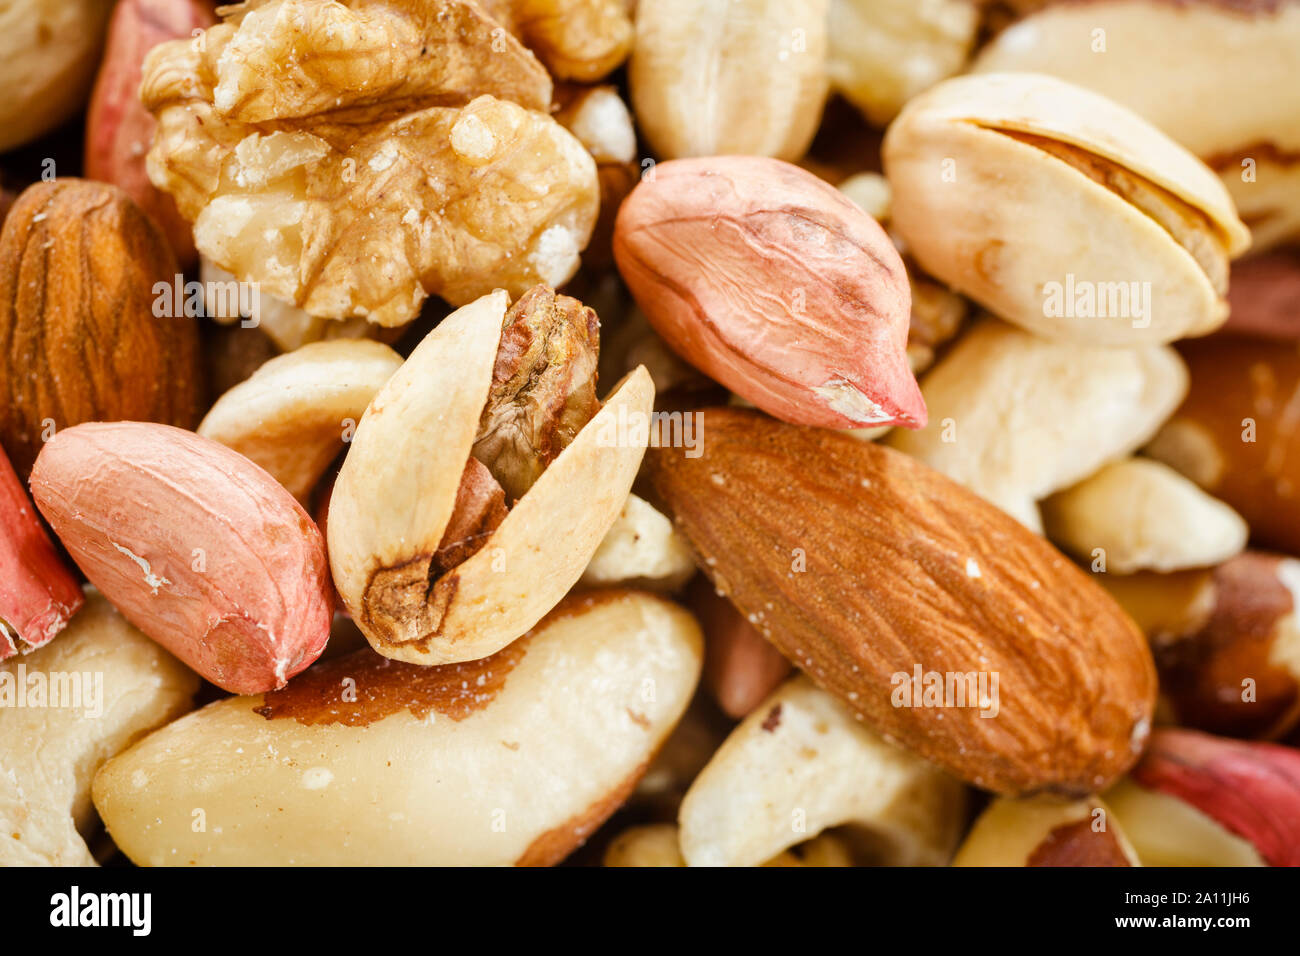 Mixed pile of nuts close up Stock Photo